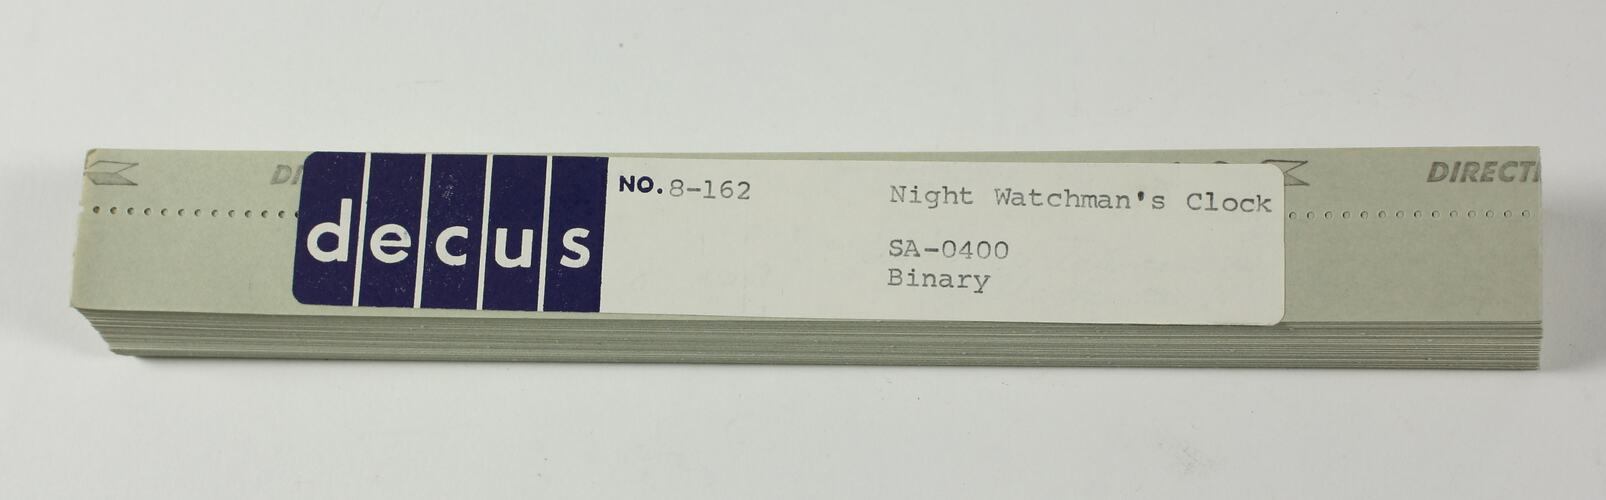 Paper tape from Night Watchman's clock.